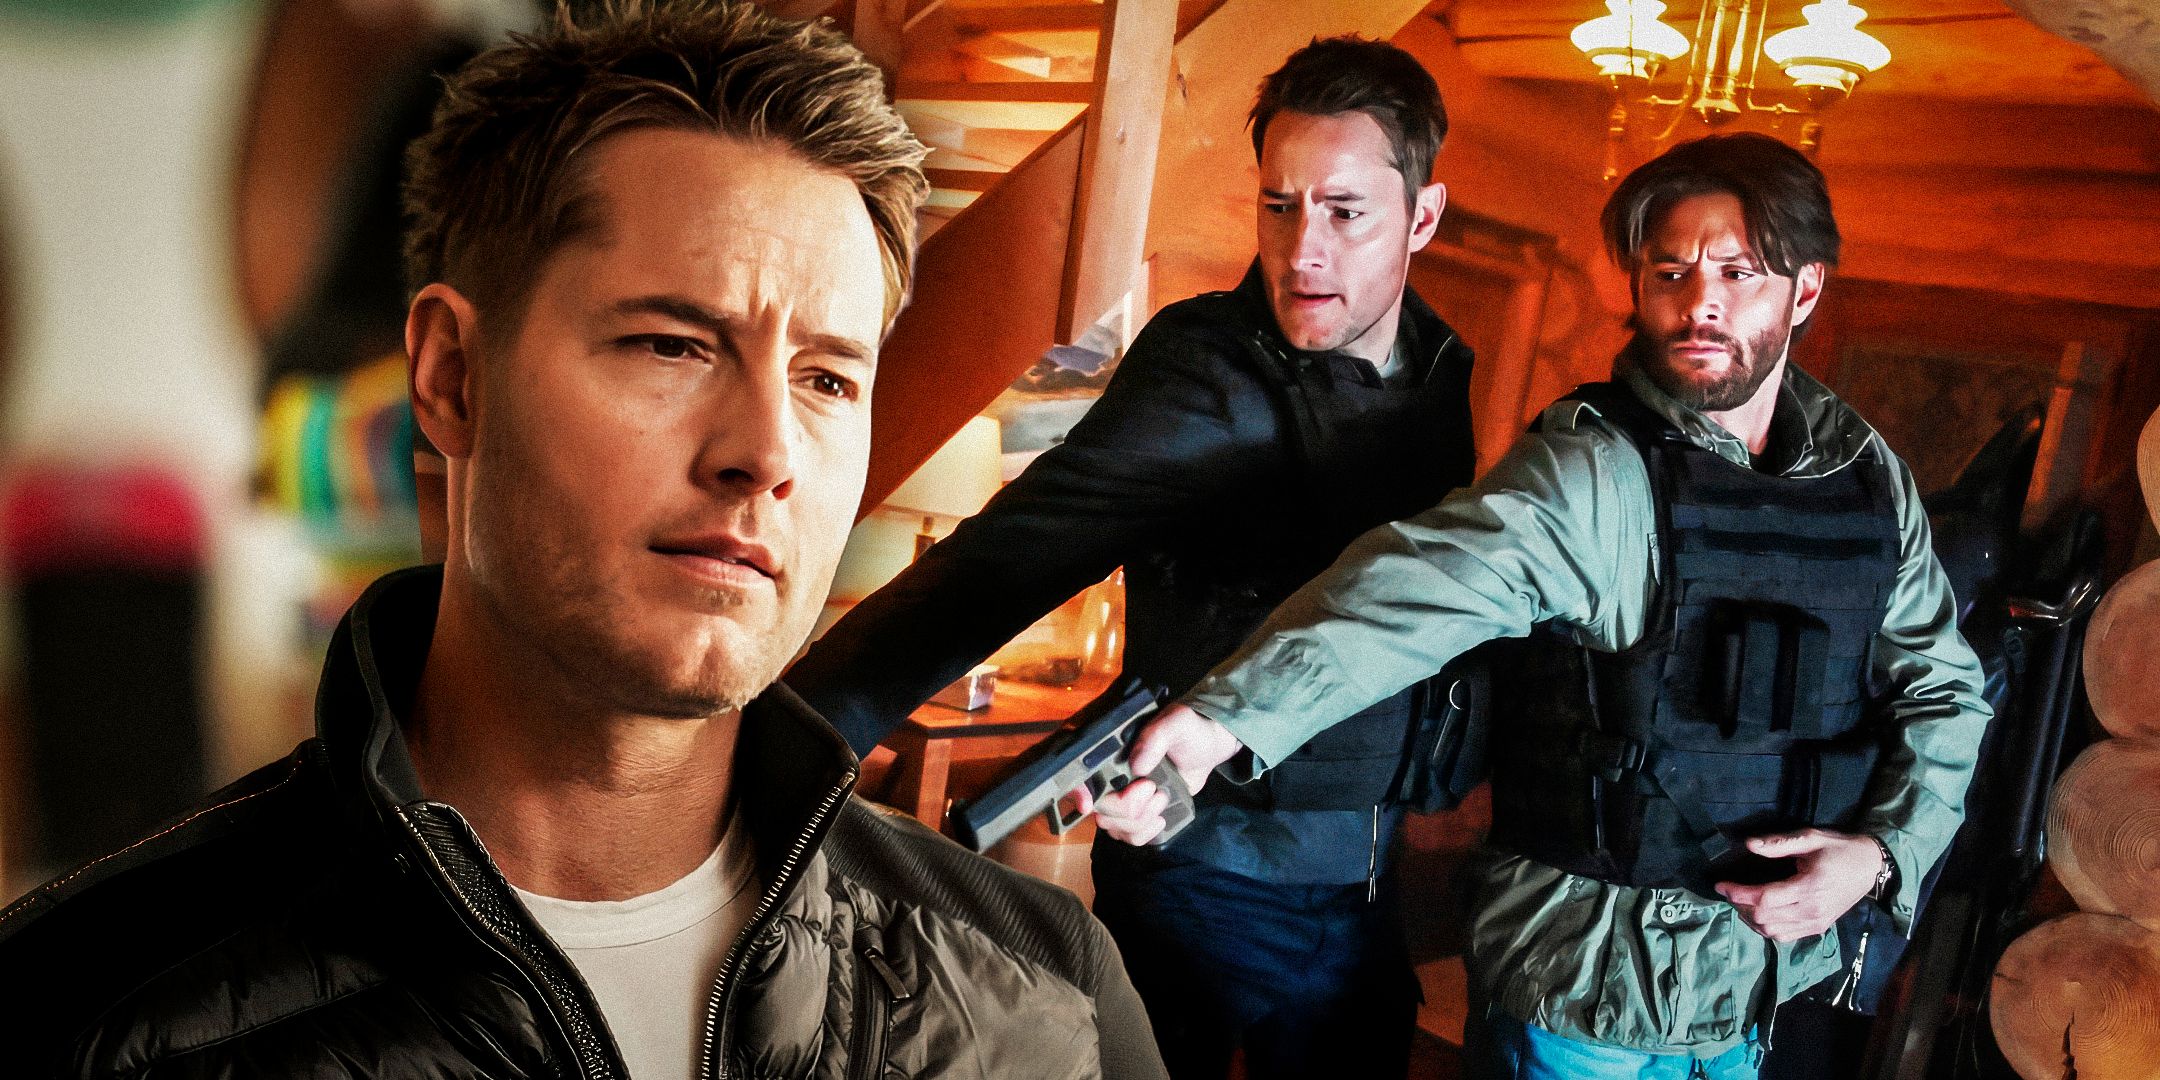 Justin-Hartley-as-Colter-Shaw-from-Tracker